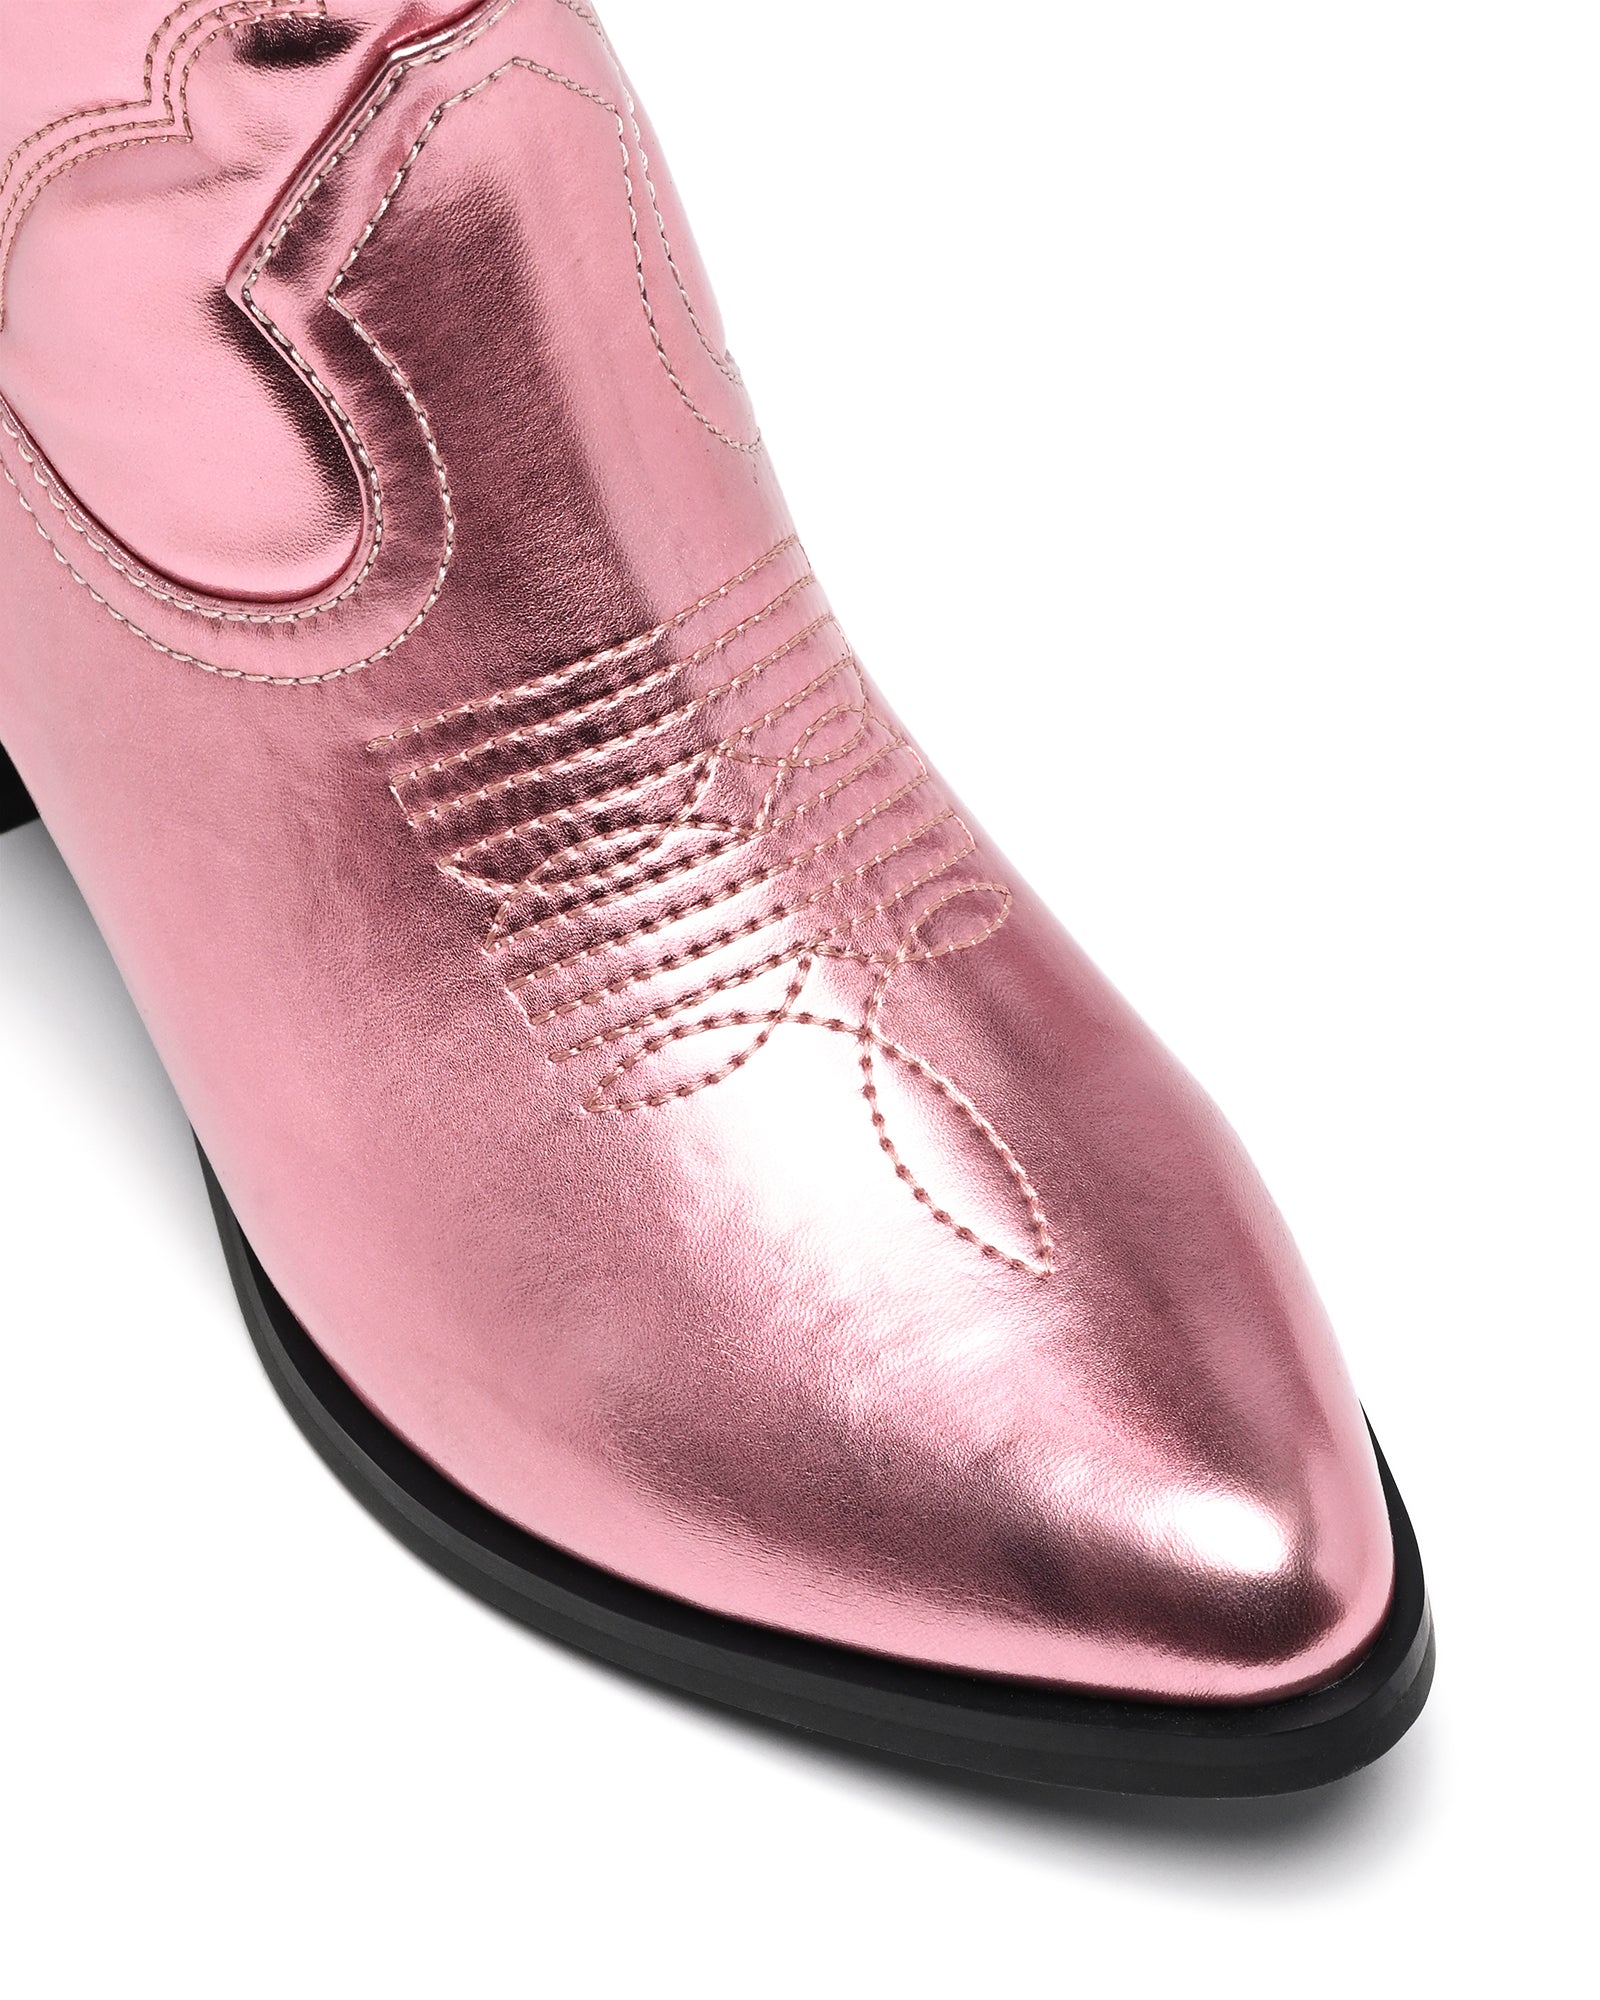 Therapy Shoes Ranger Baby Pink Metallic | Women's Boots | Western | Cowboy | Tall